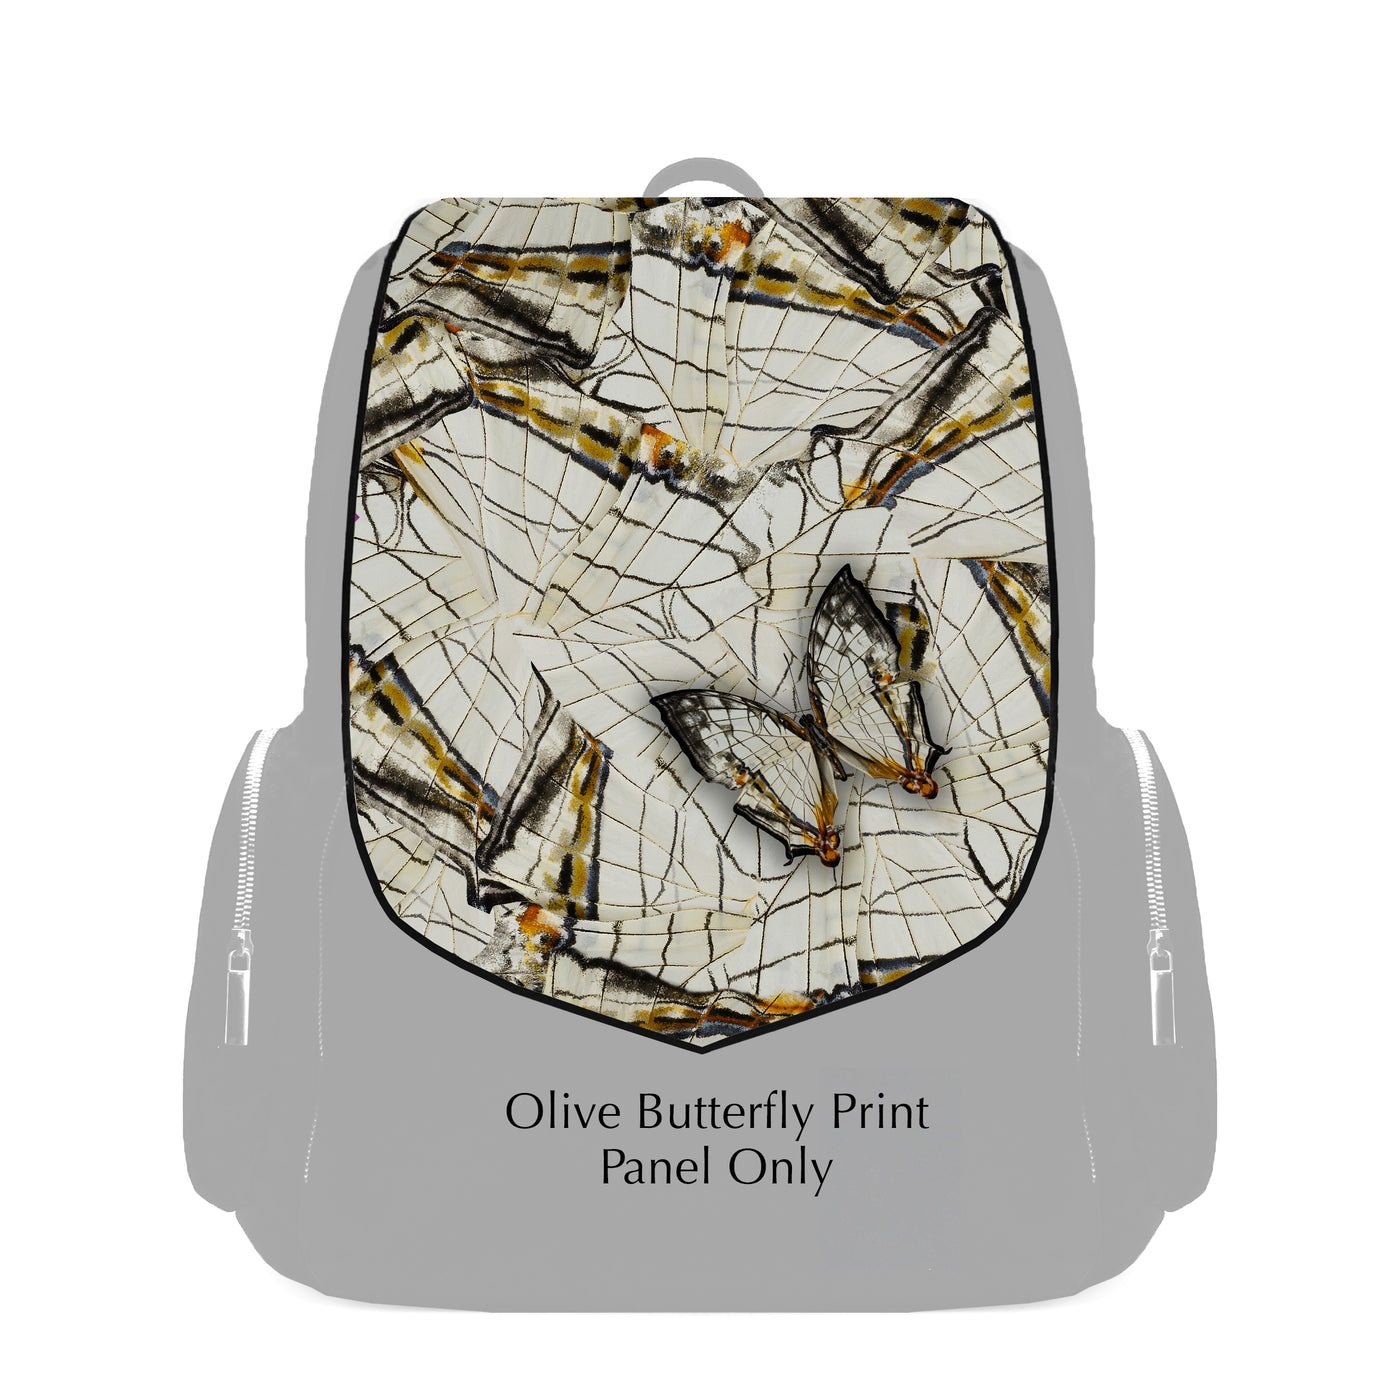 Panel Only in Olive Butterfly Print